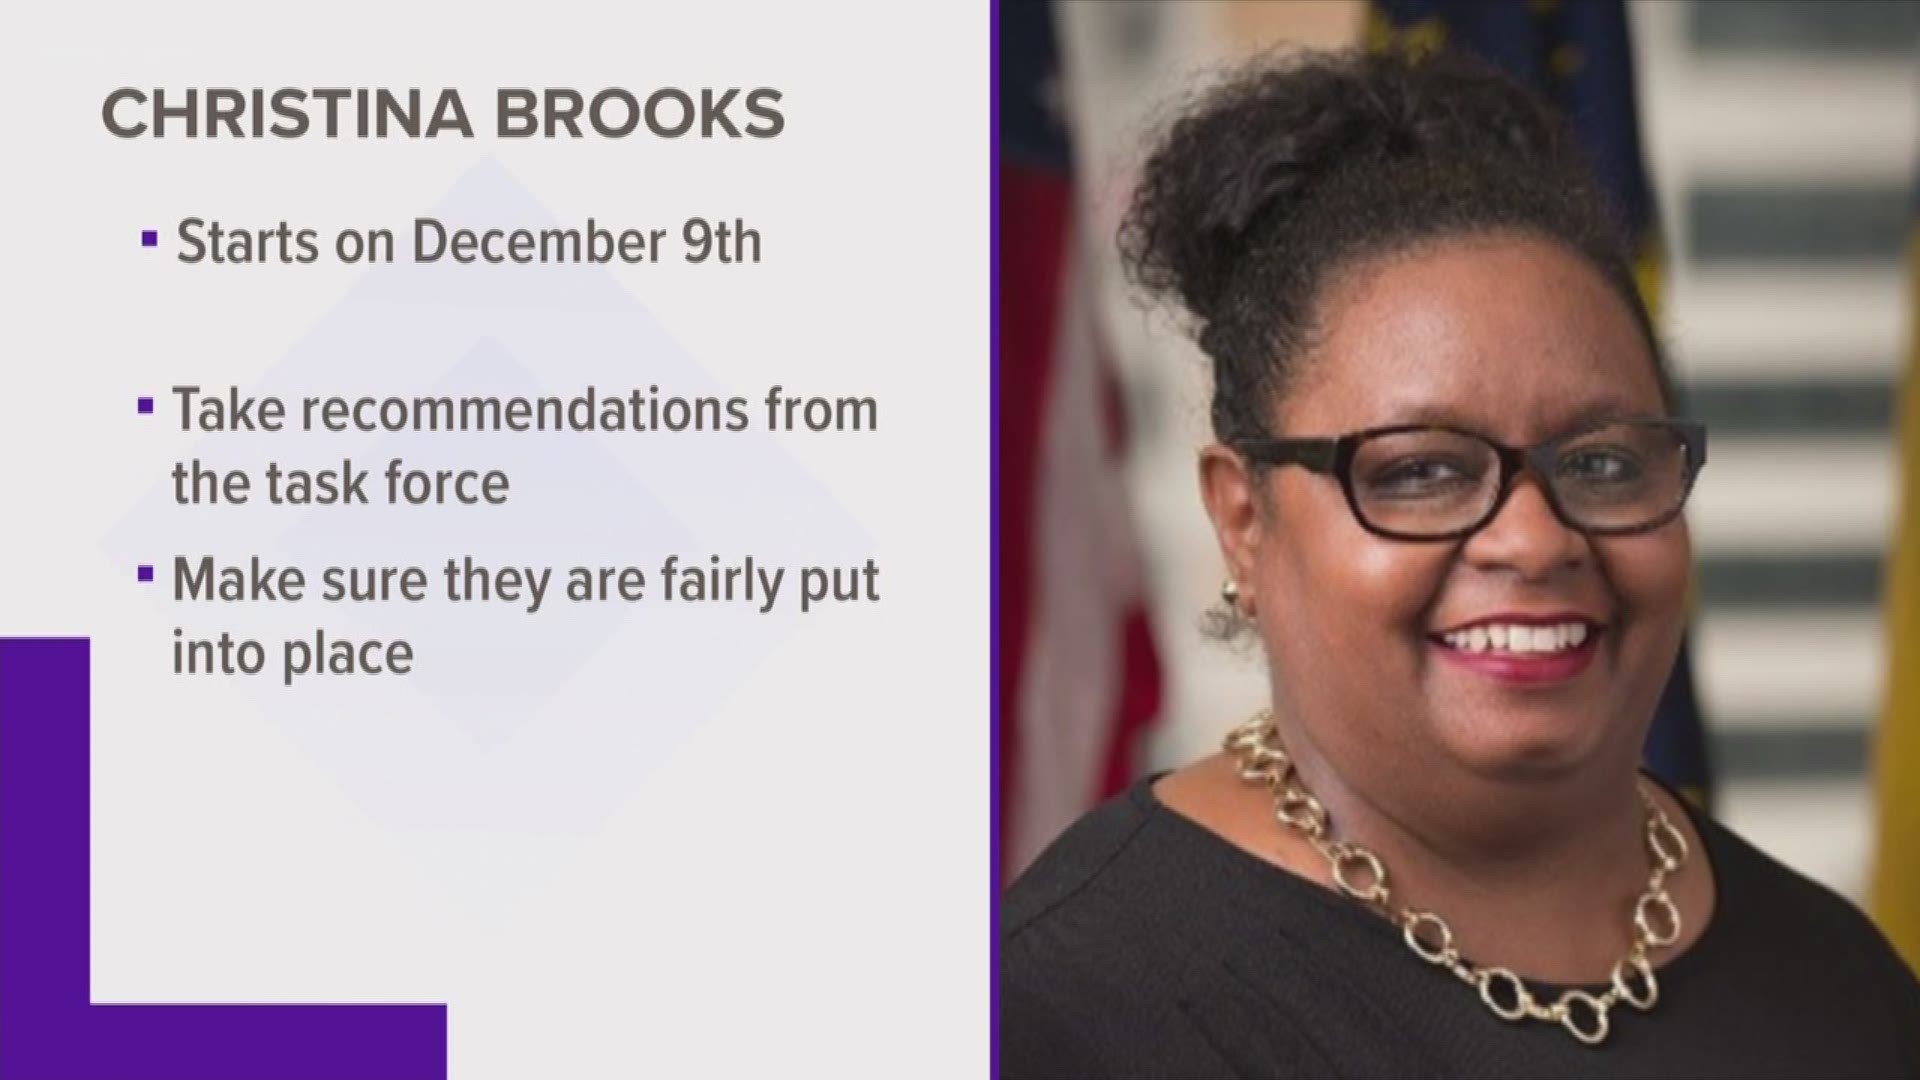 The City of Fort Worth has named the Director of its new Diversity and Inclusion Department. Christina Brooks, a Texas native will start her new role on Dec. 9.